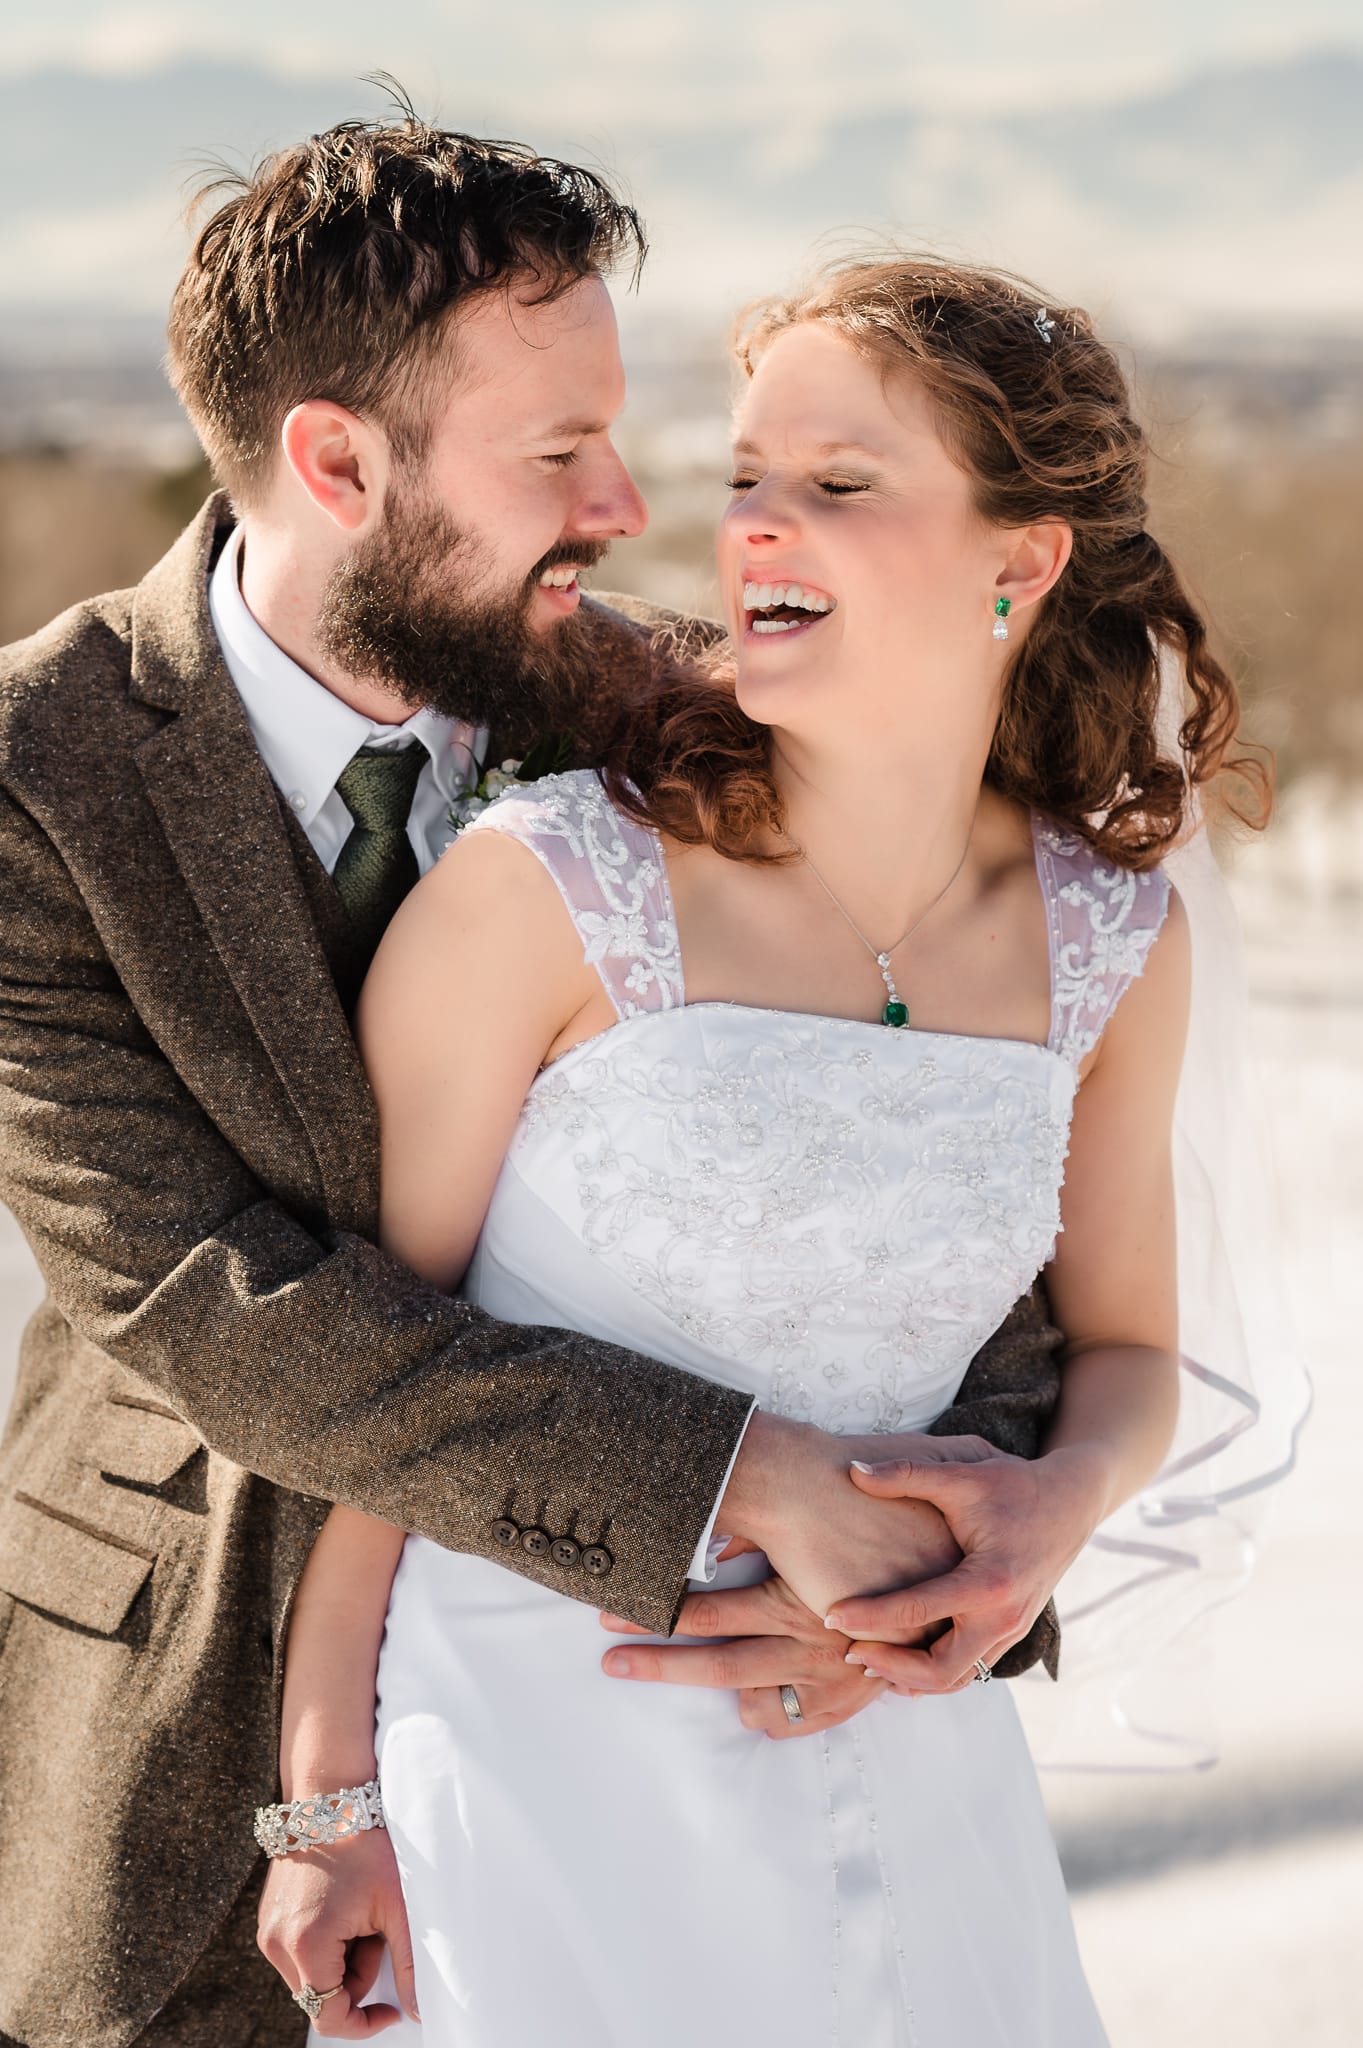 The groom holds his bride in the snow and they laugh together.